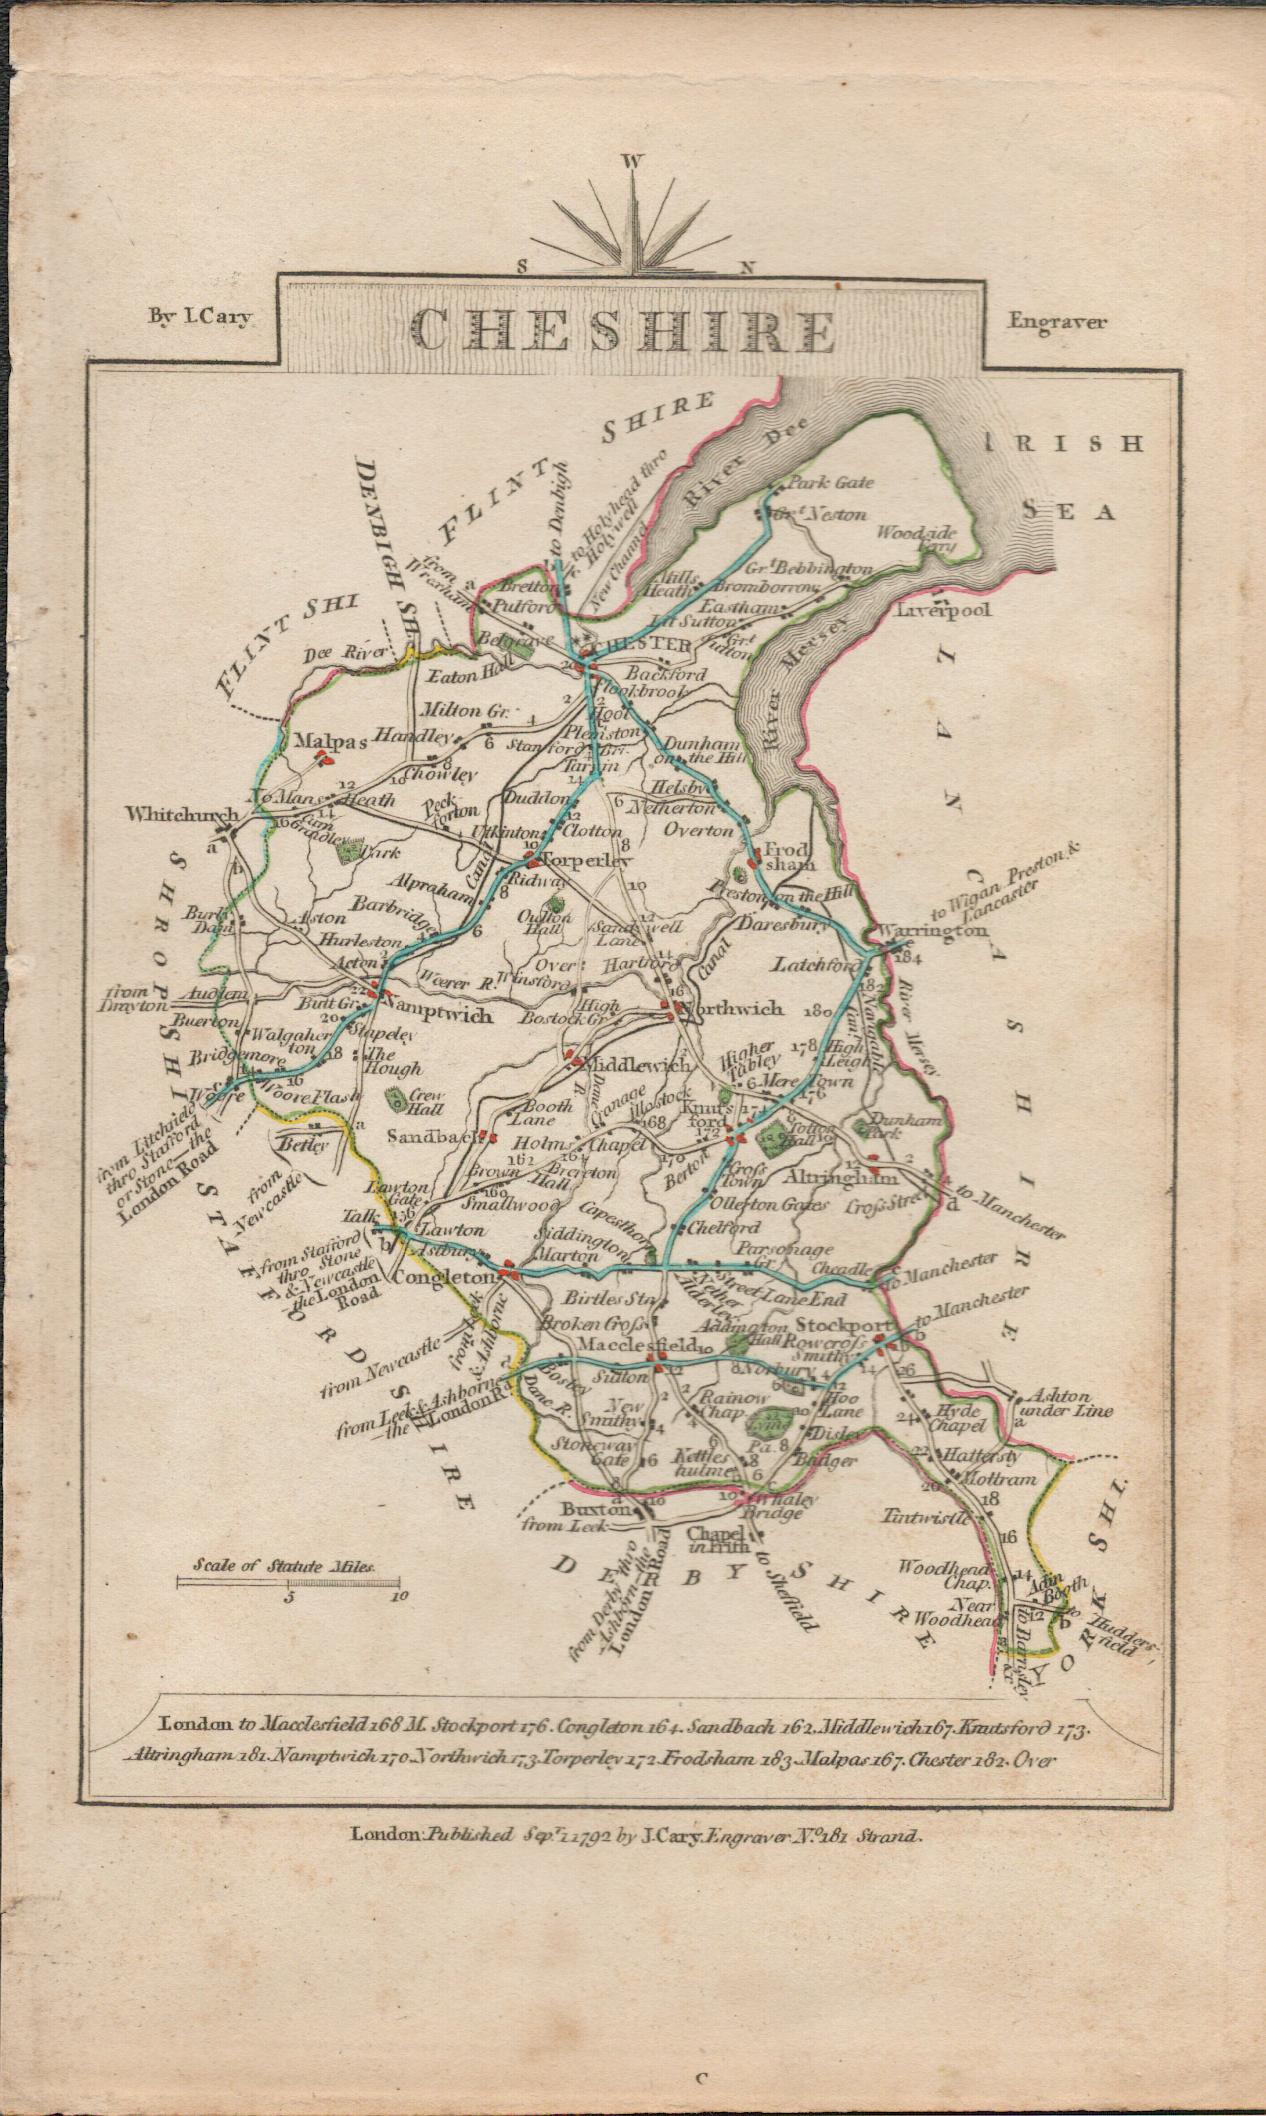 John Cary’s 1791 Antique Copper Engraved Map Cornwall & Cheshire. - Image 2 of 2